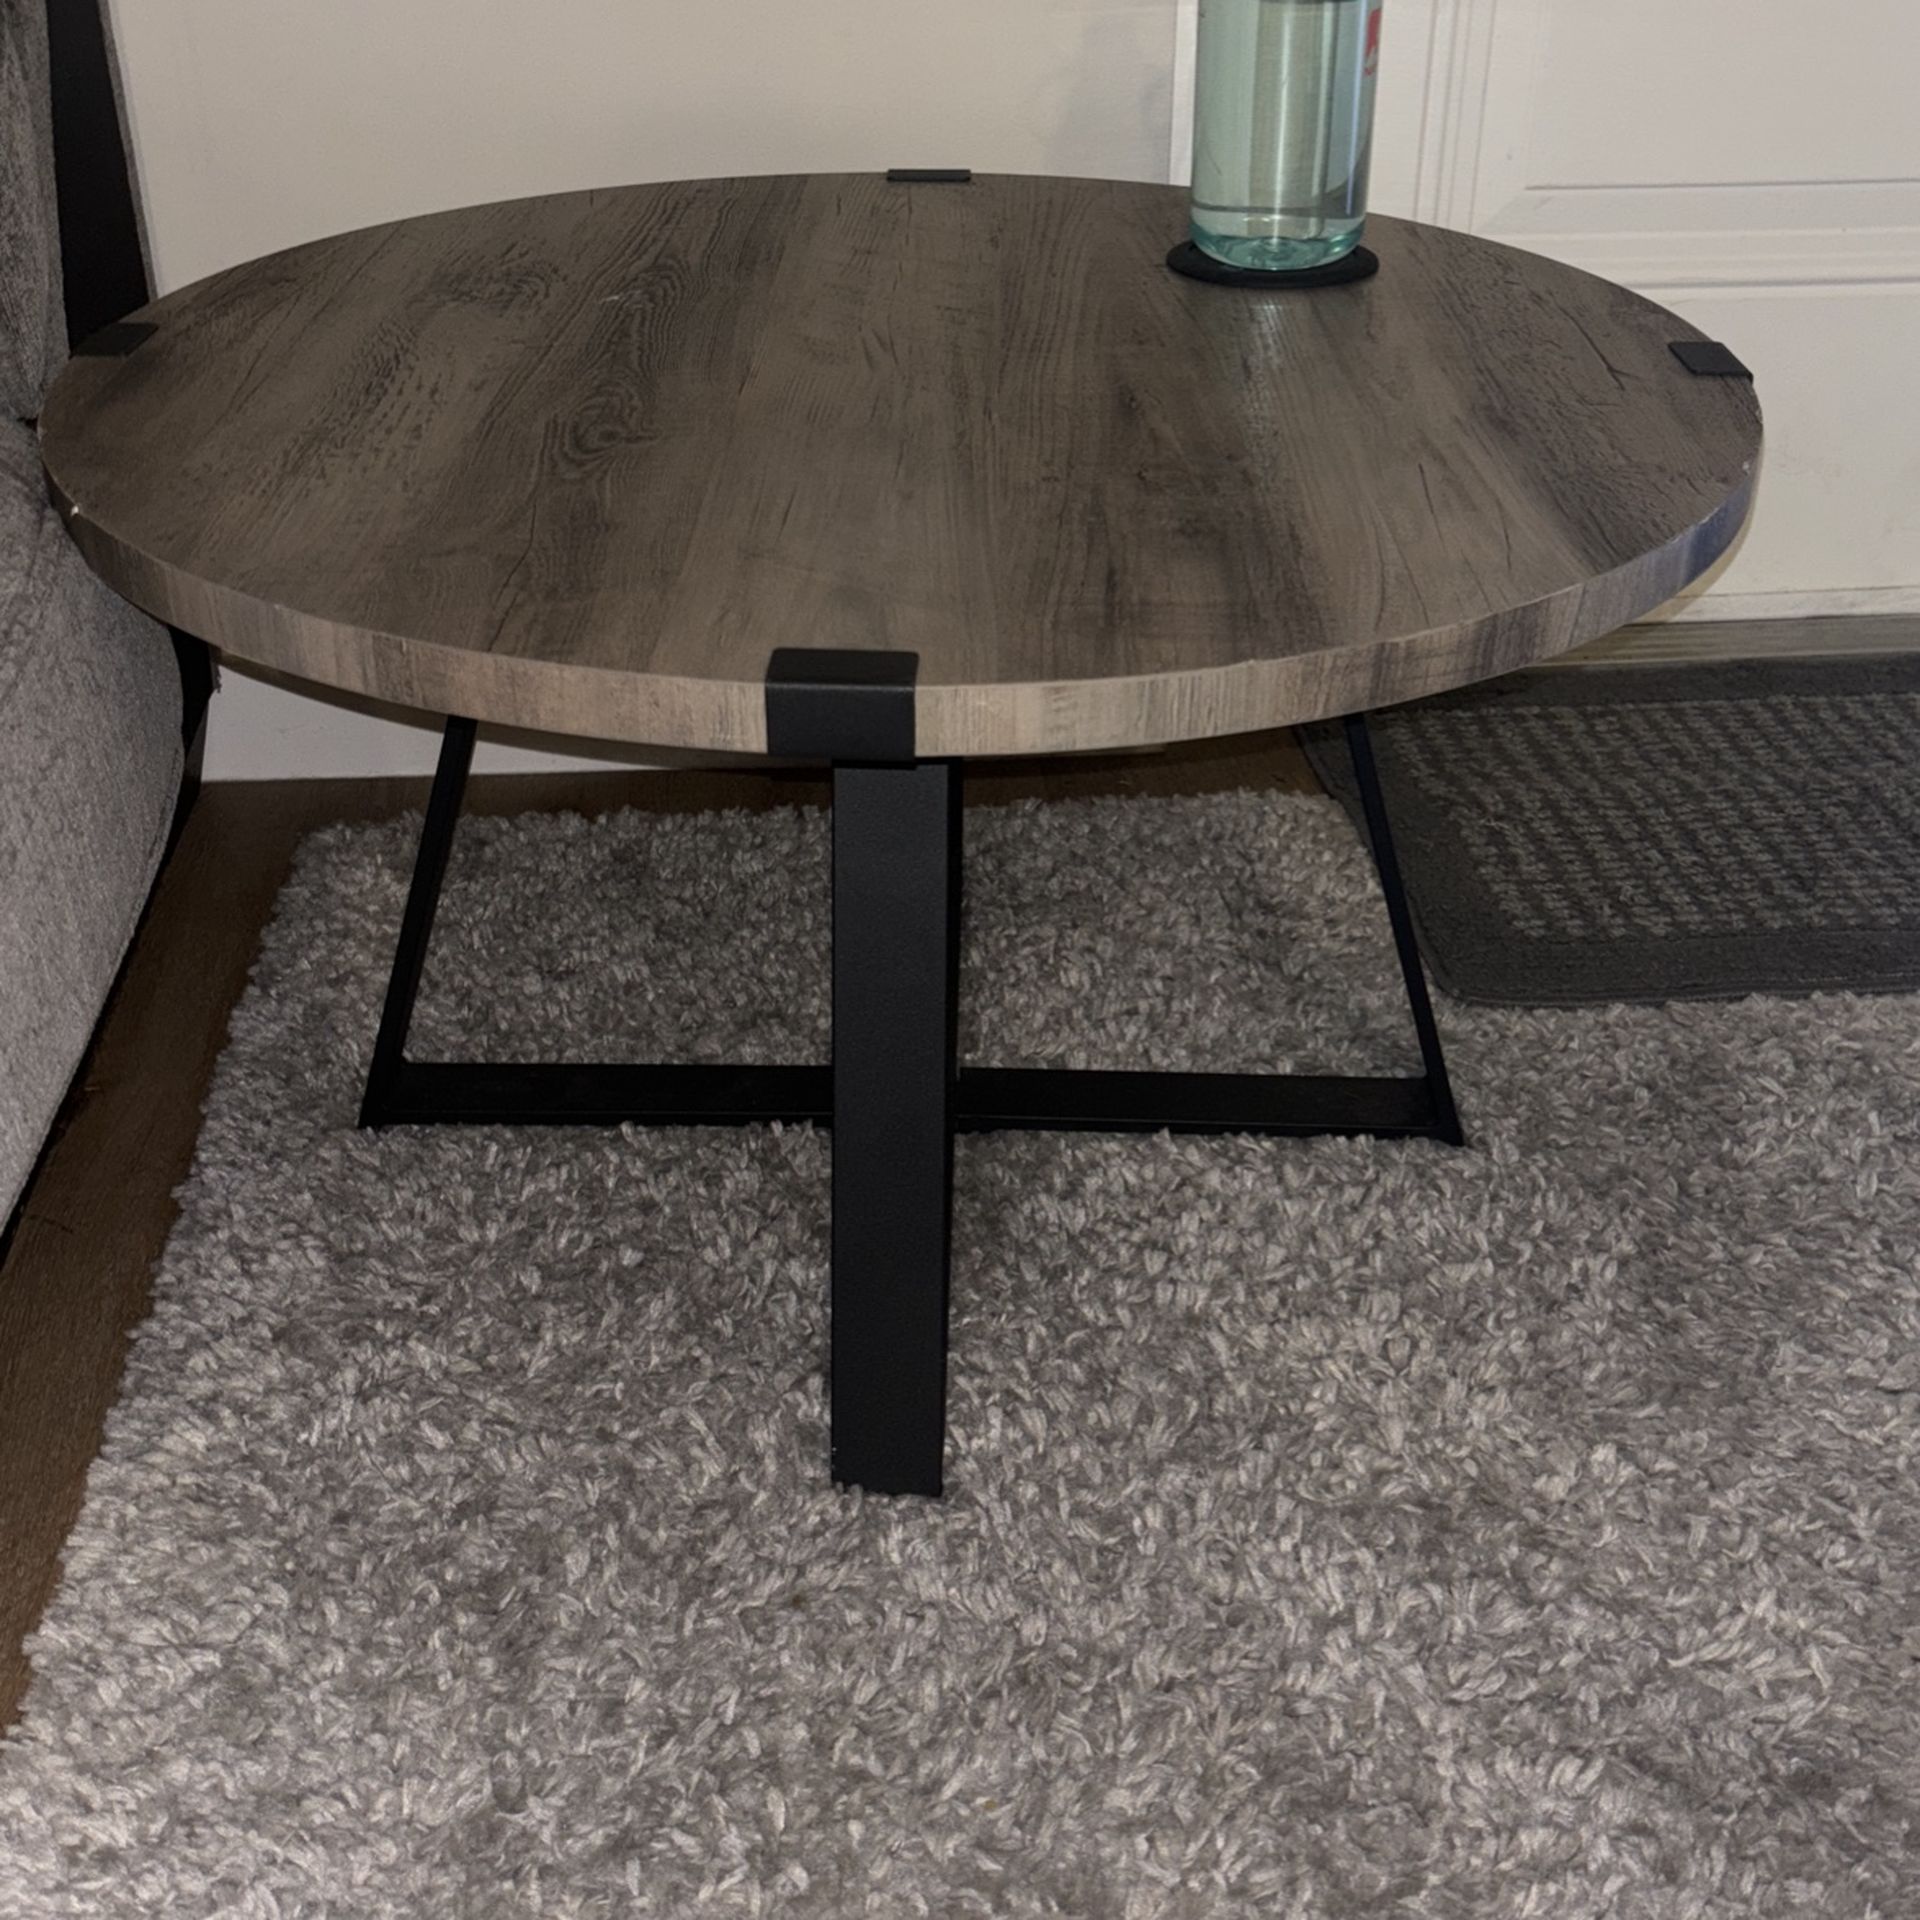 Coffee Table For Living Room